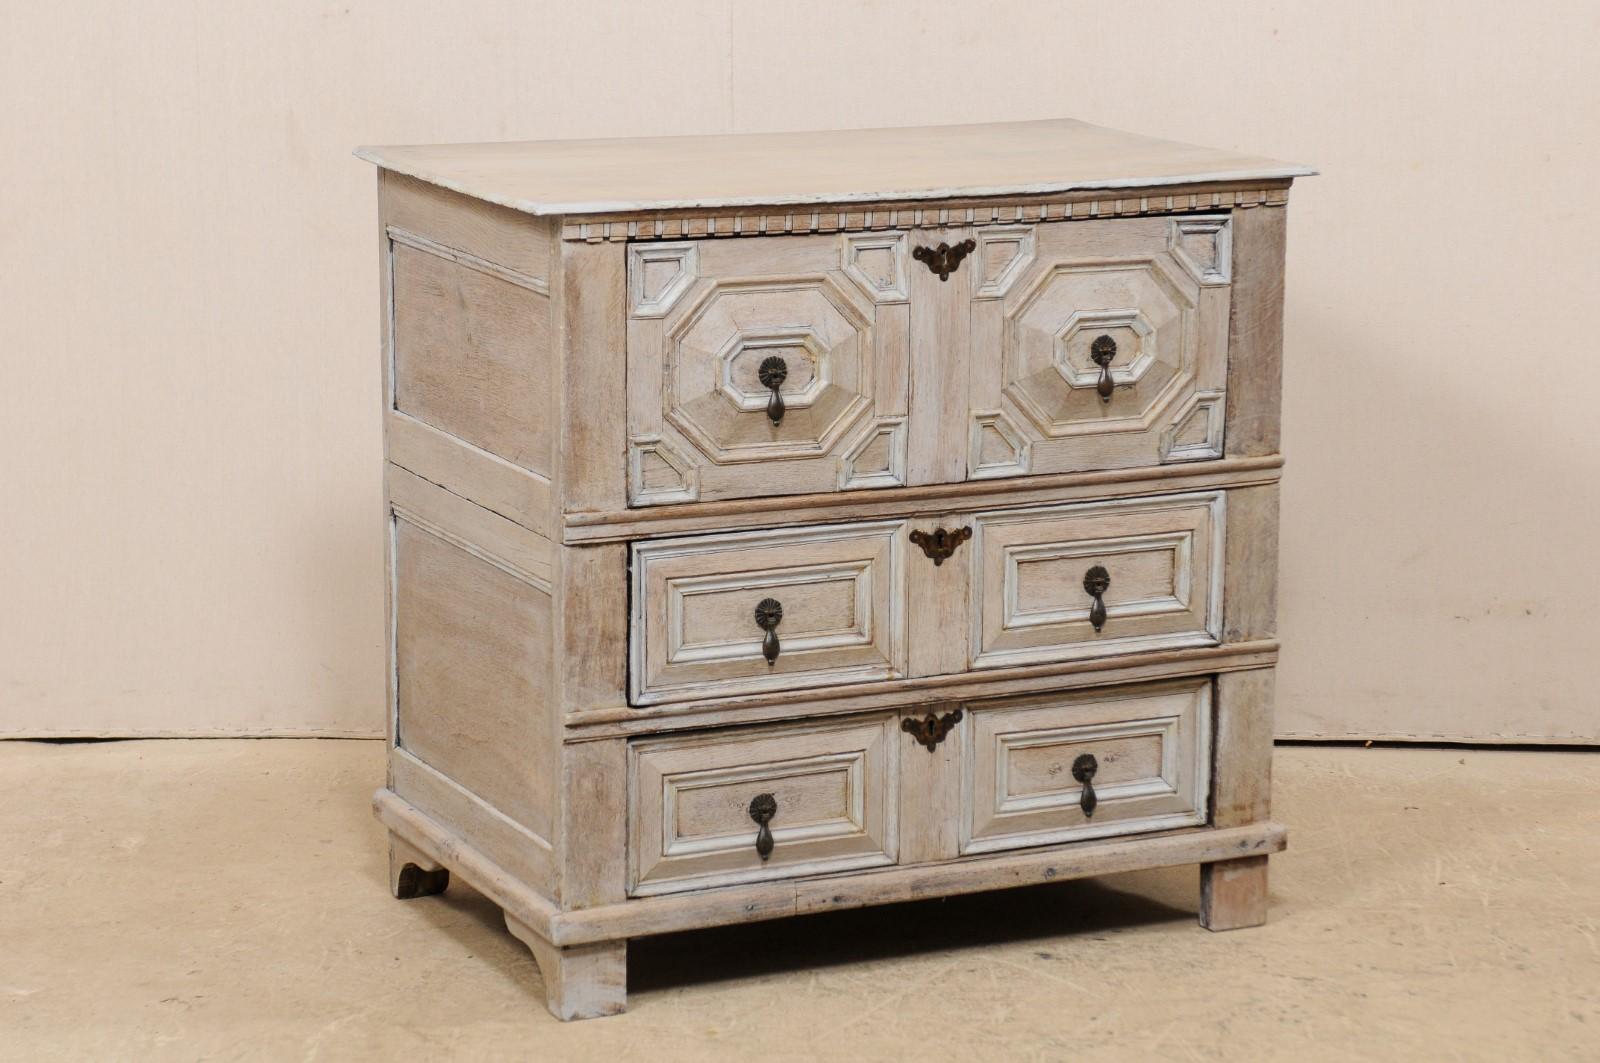 An English carved wood chest of three drawers from the 18th century. This antique chest from England has a rectangular-shaped top with beautiful accent trim just under the top front lip, and fabulously carved geometrical designed paneled fronts